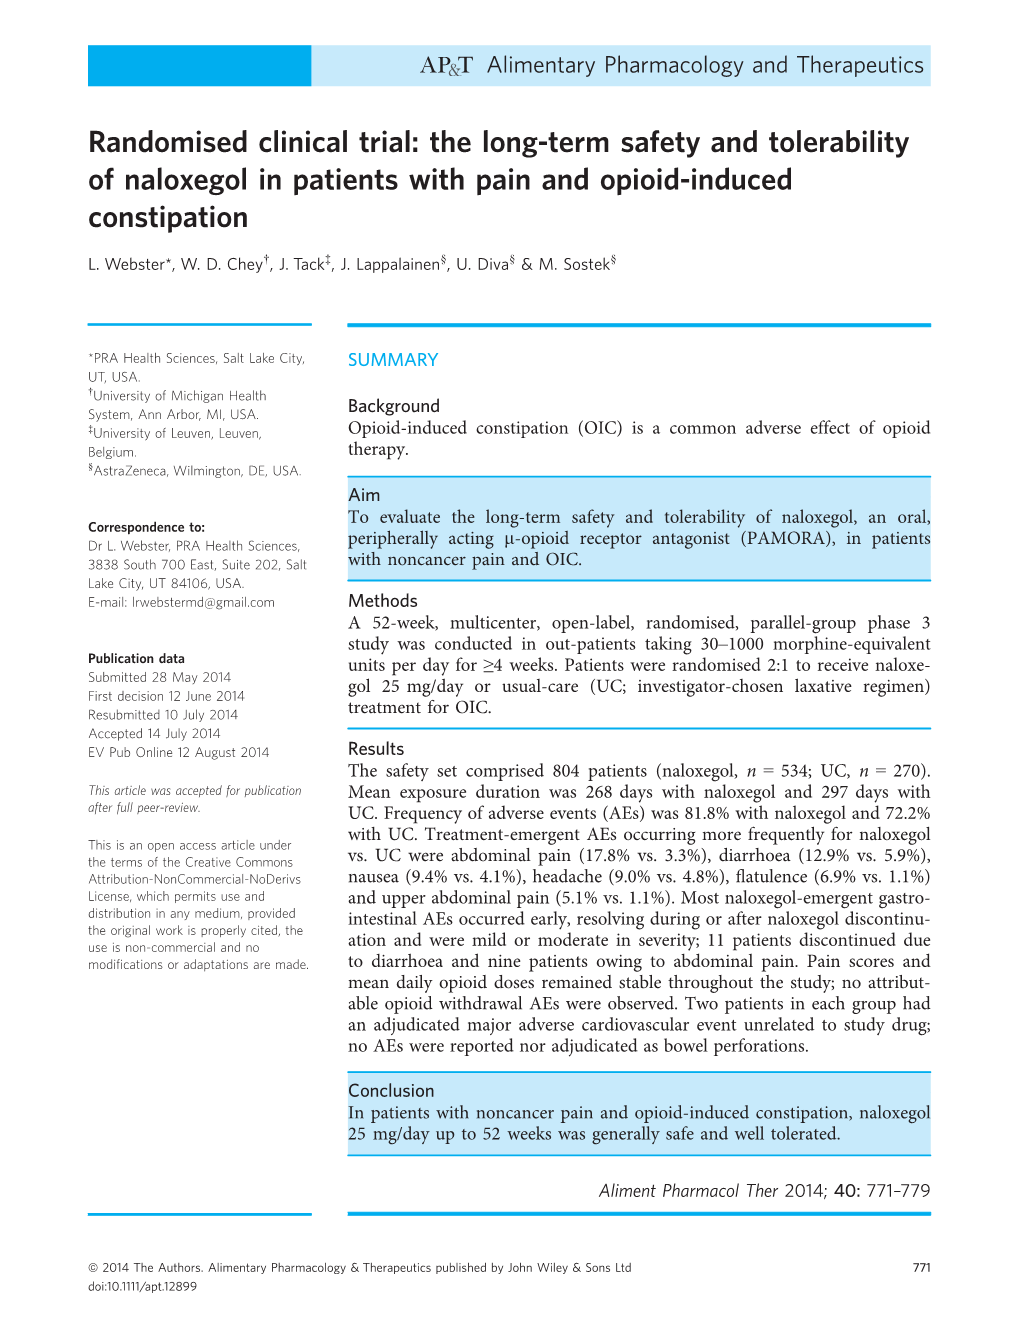 Randomised Clinical Trial: the Long-Term Safety and Tolerability of Naloxegol in Patients with Pain and Opioid-Induced Constipation